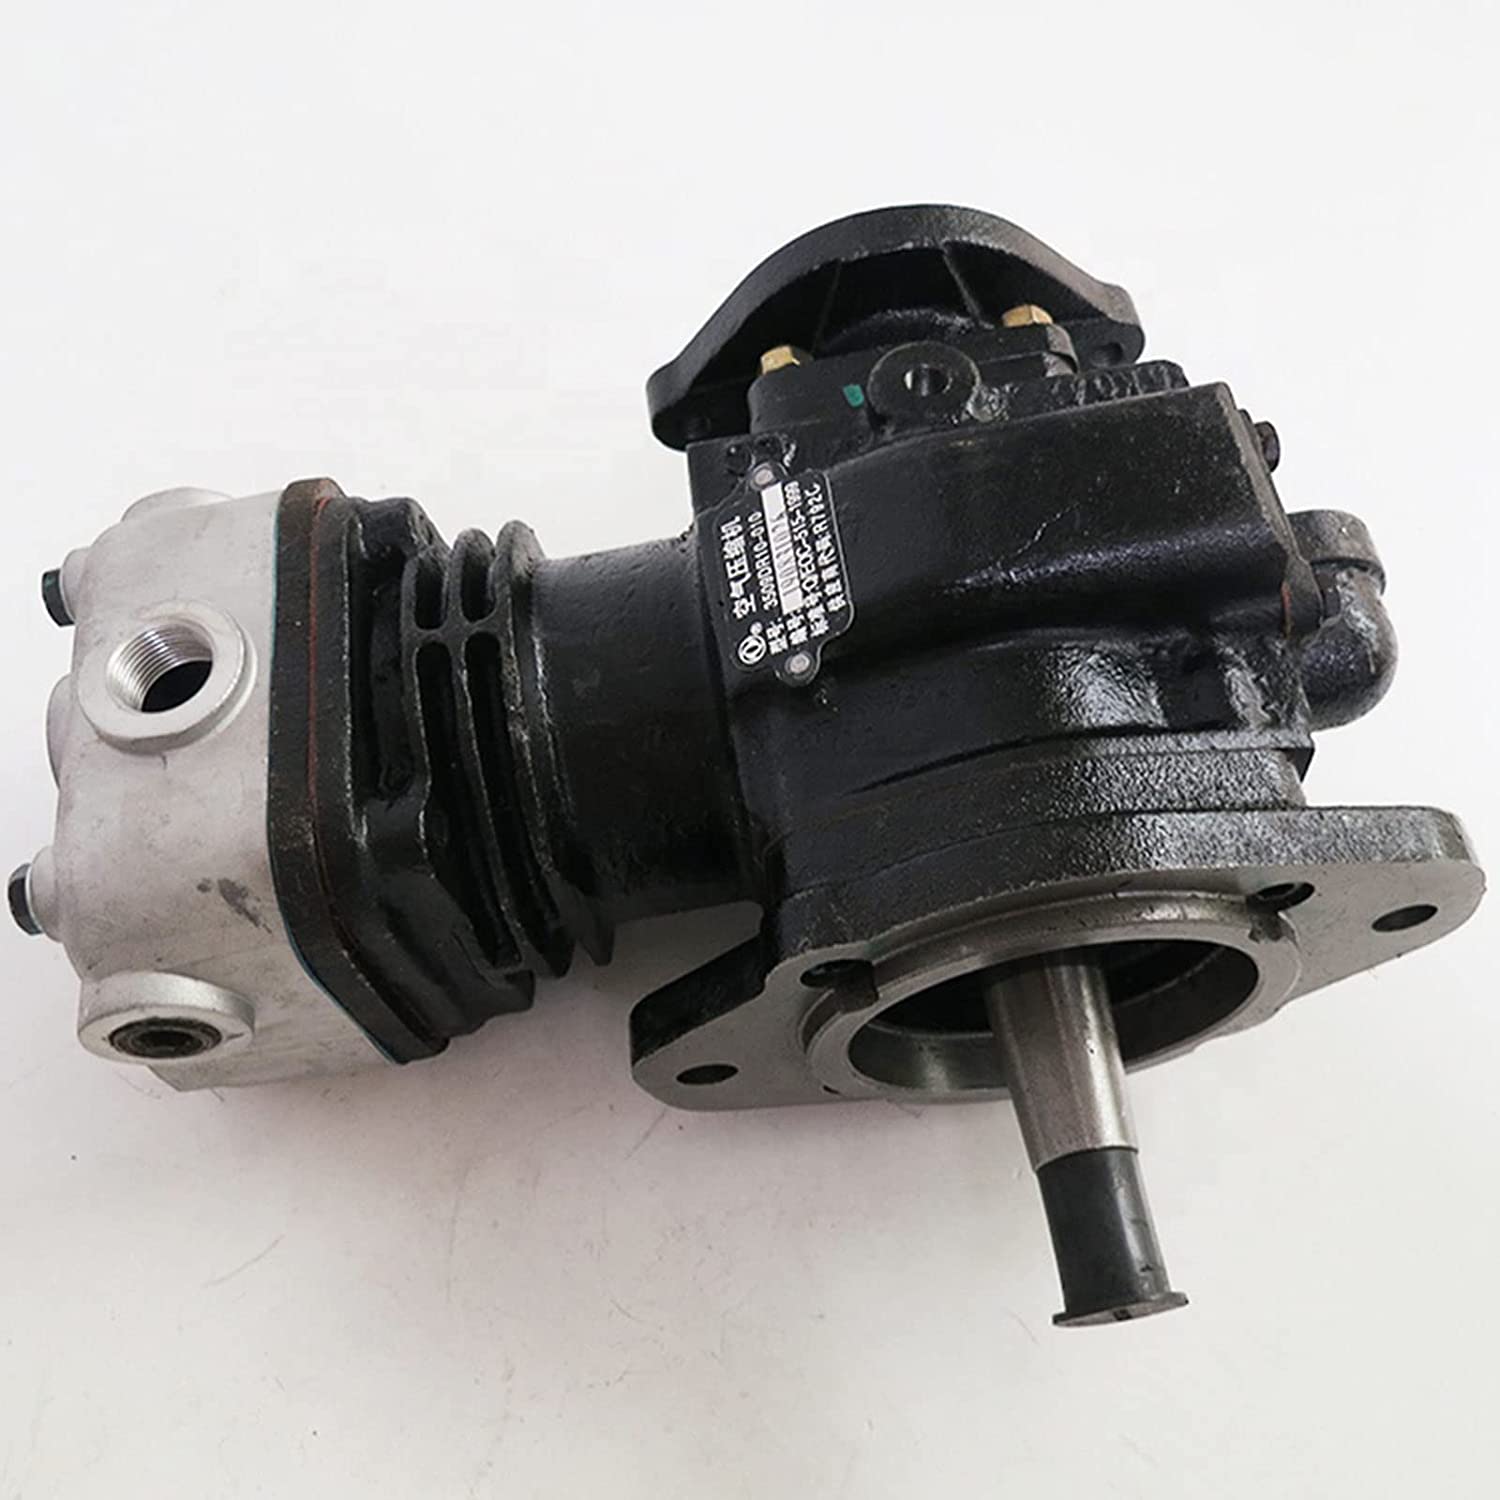 Seapple New Air Compressor Pump 3974548 A3974548 Compatible with Cummins 210/160 6BT 5.9L Diesel Engine - image 4 of 6